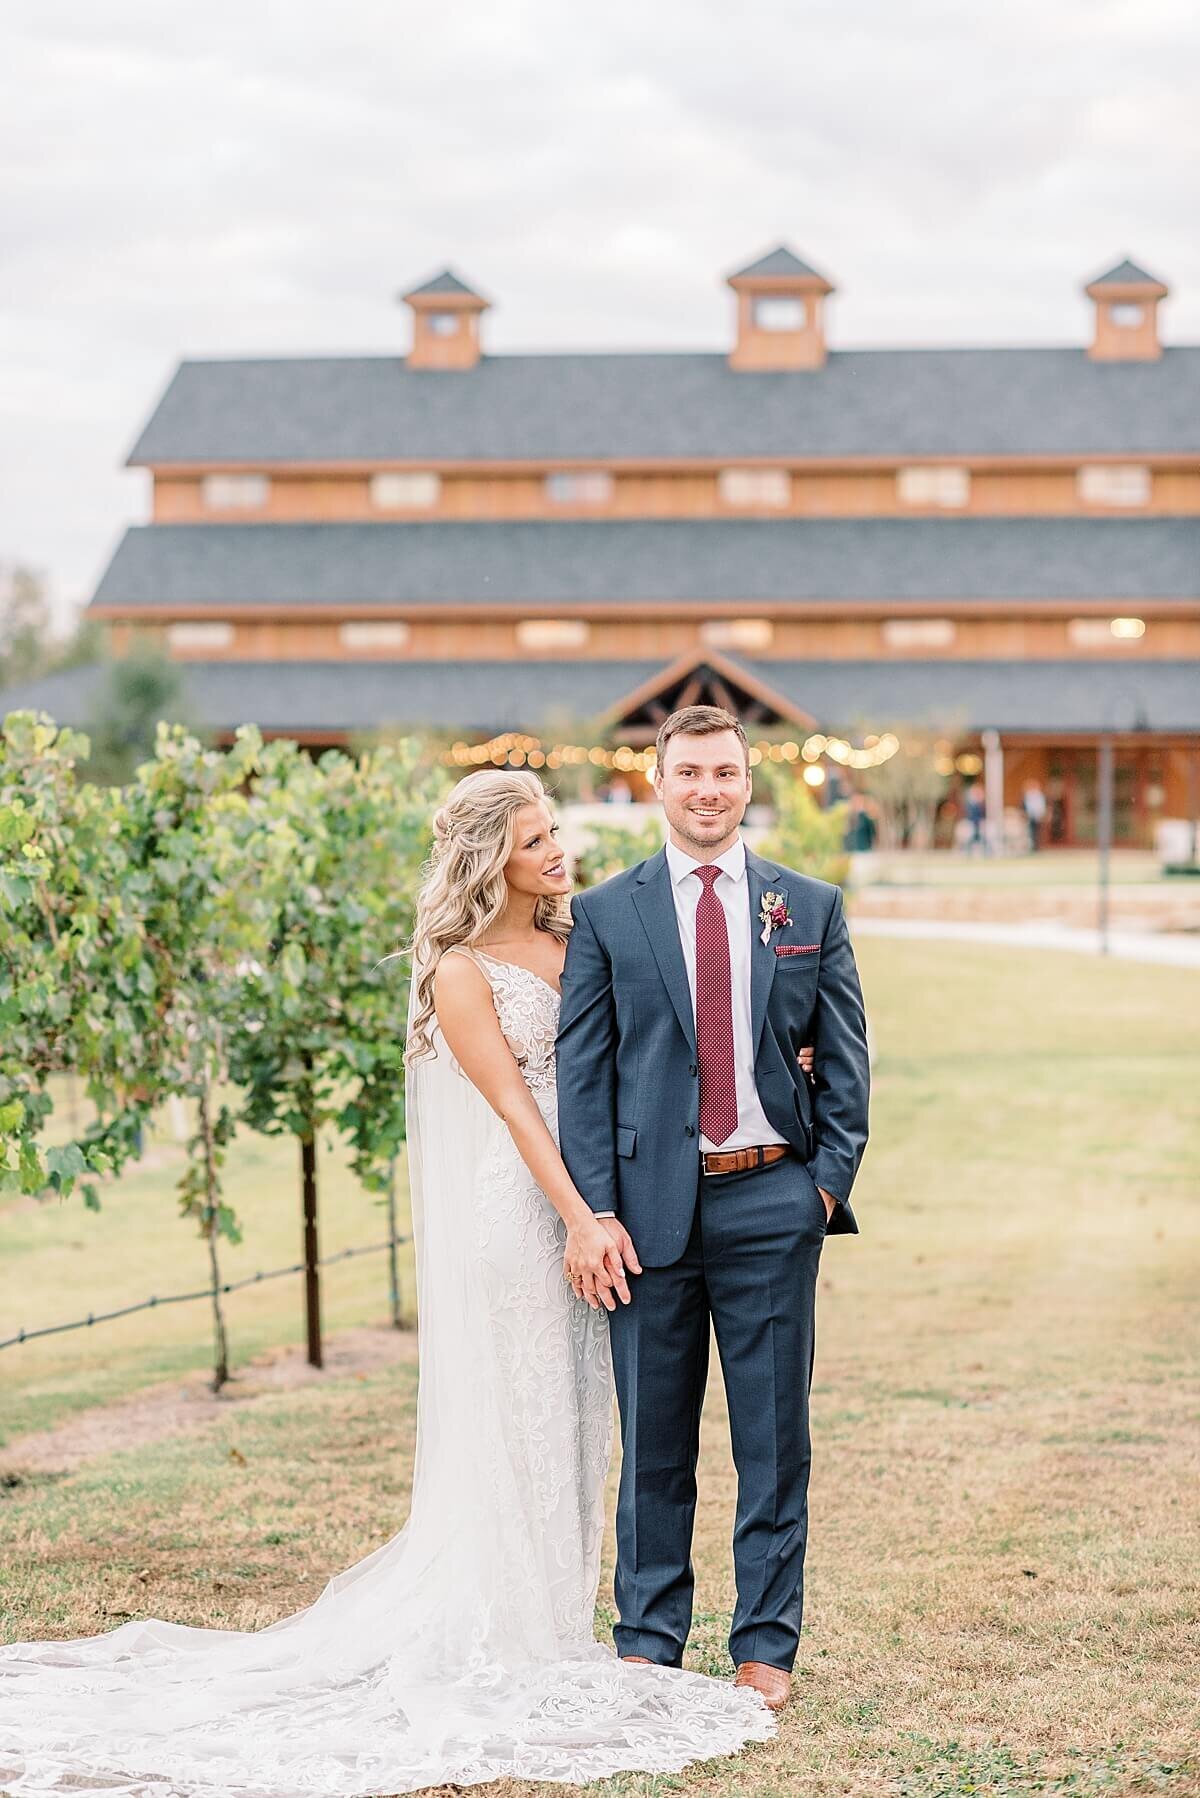 Bride and Groom Portraits at the Weinberg at Wixon Valley in Bryan Texas photographed by Alicia Yarrish Photography